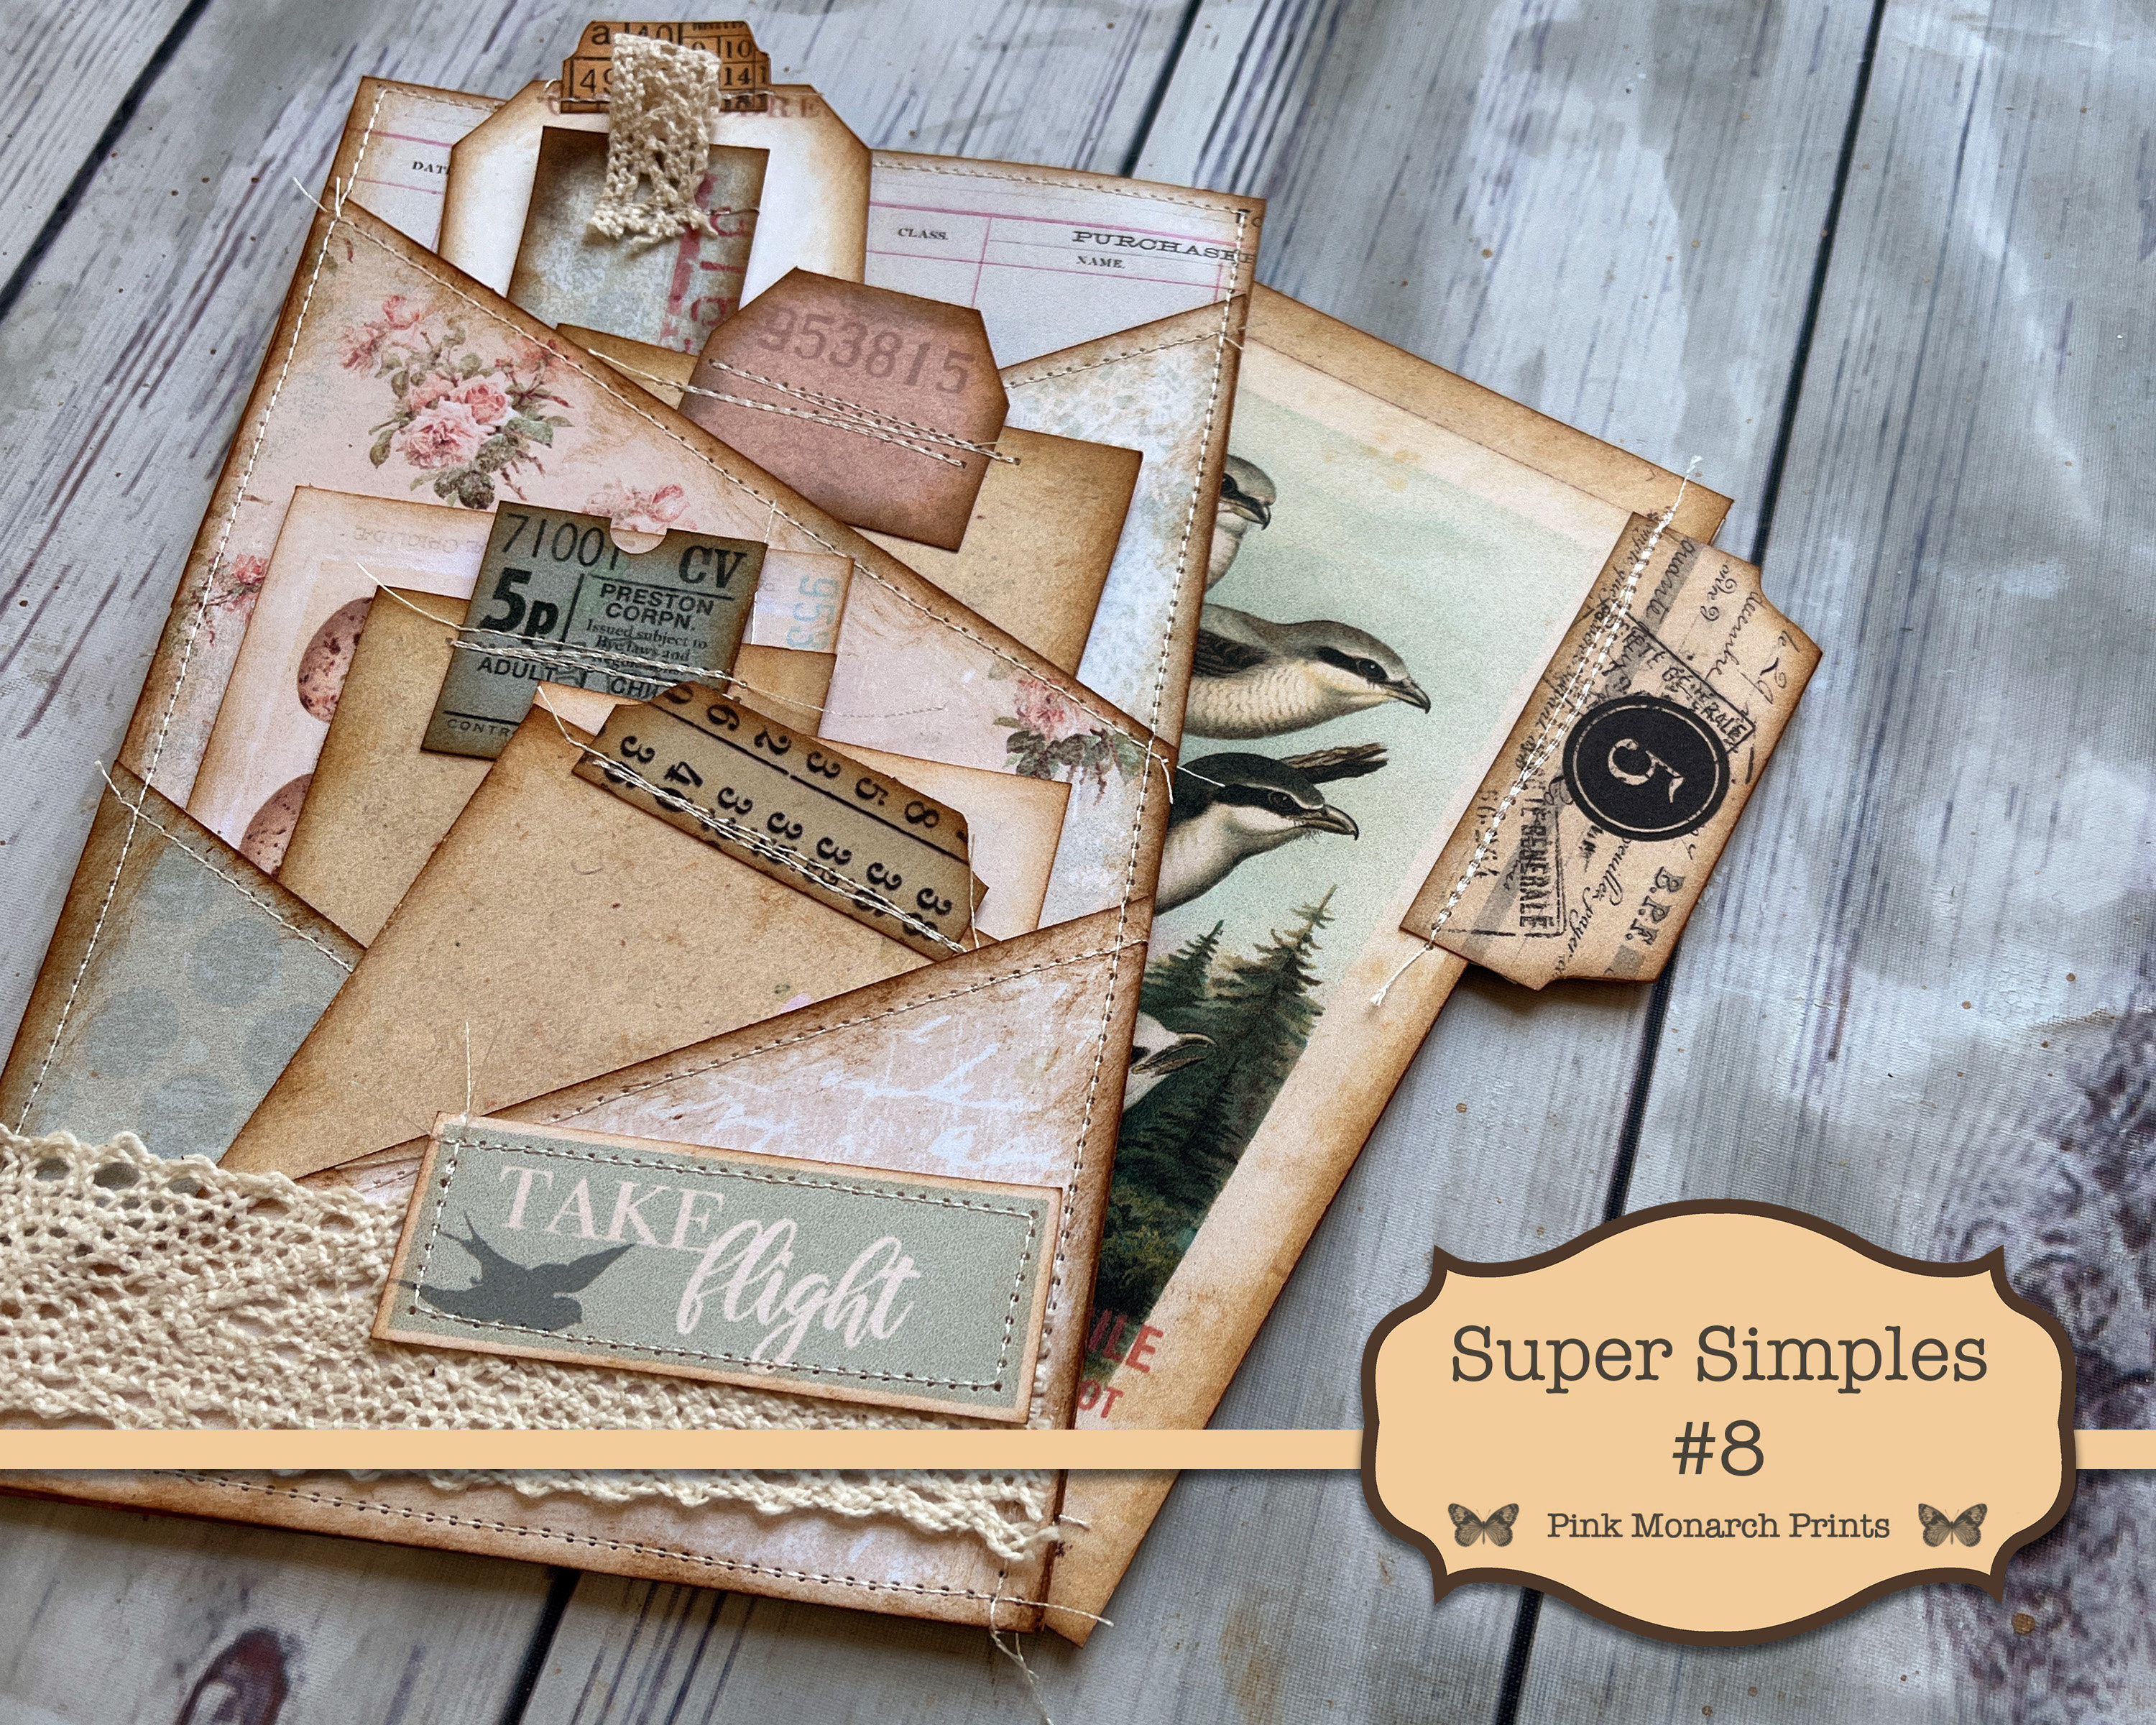 How to make a tiny art journal kit & create art every day - Digital Junk  Journals